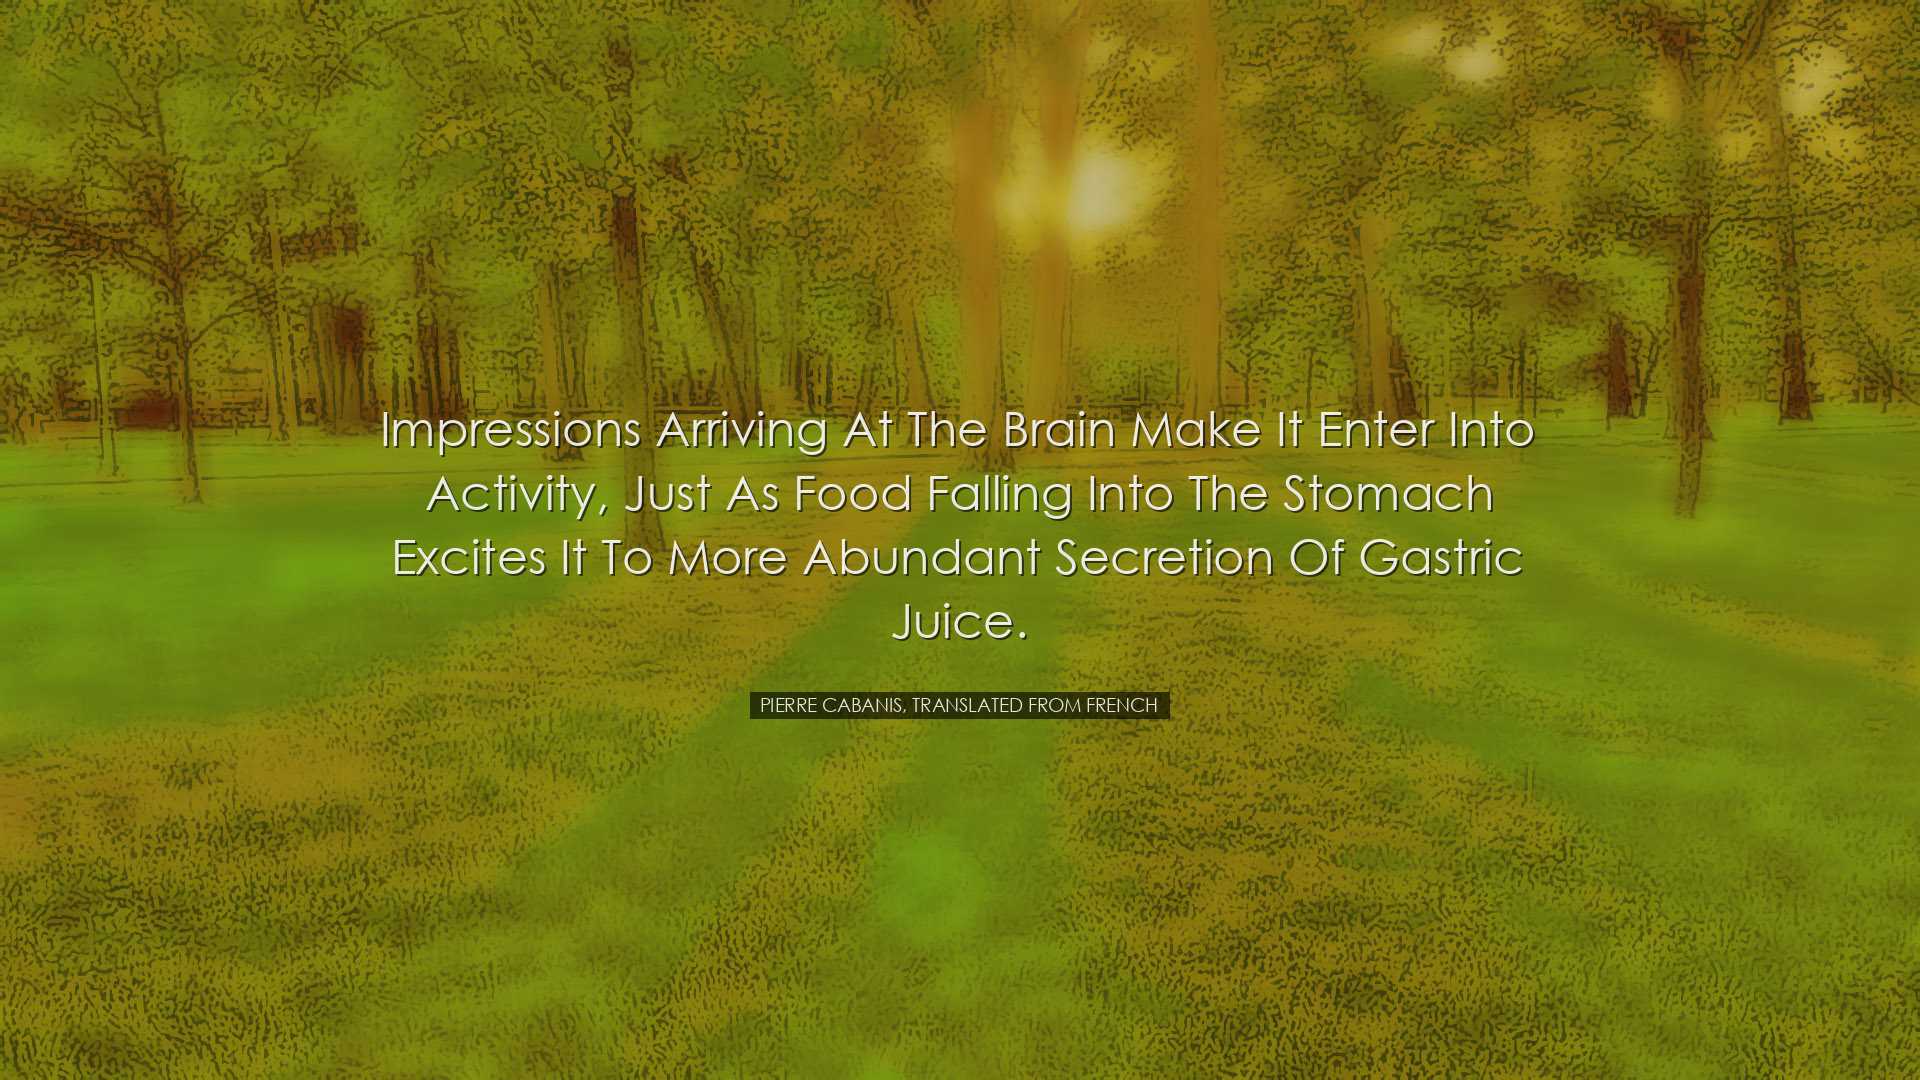 Impressions arriving at the brain make it enter into activity, jus